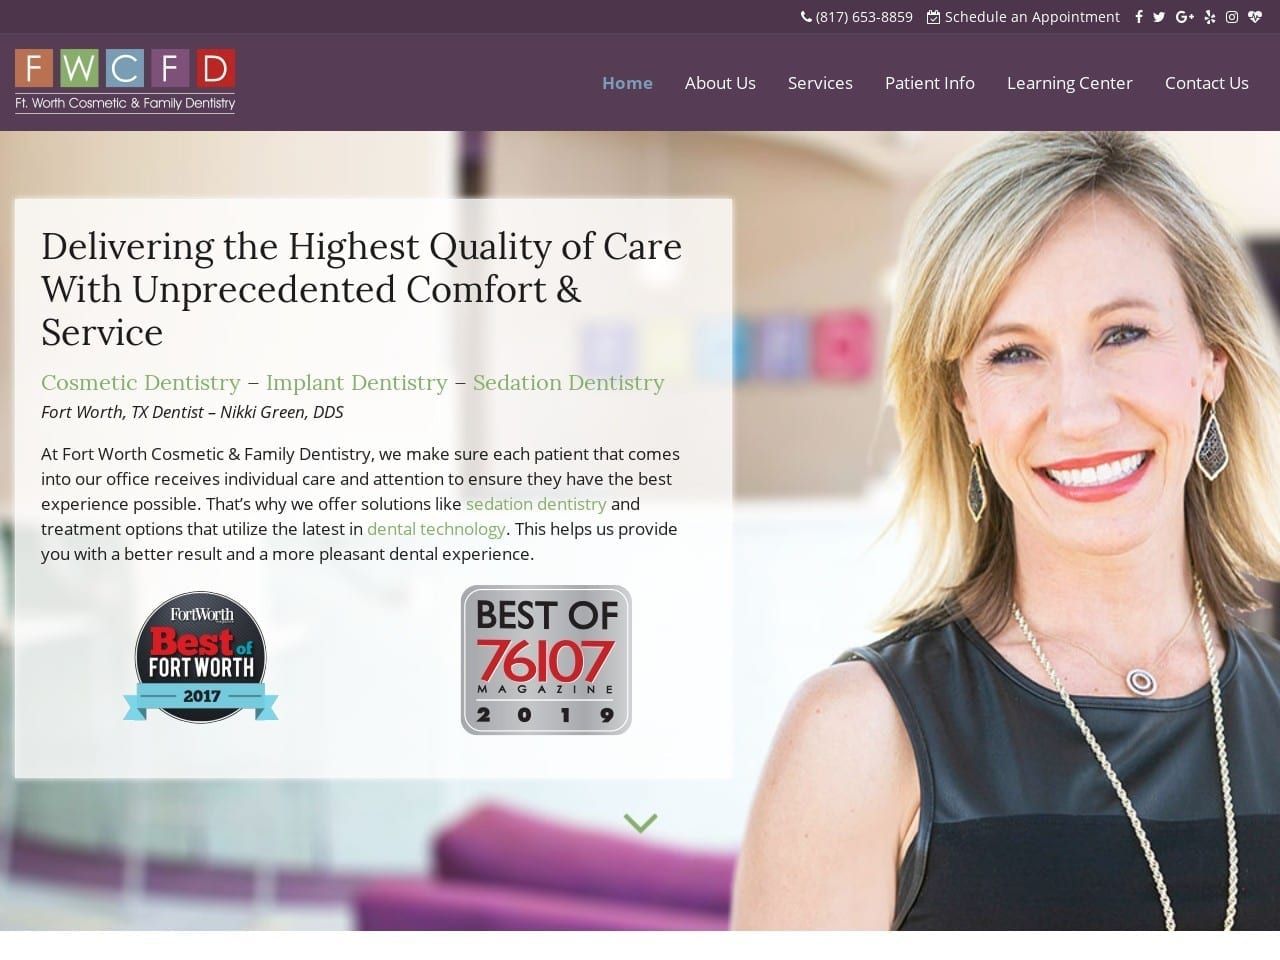 Fort Worth Family And Cosmetic Dentistry Website Screenshot from ngreendental.com